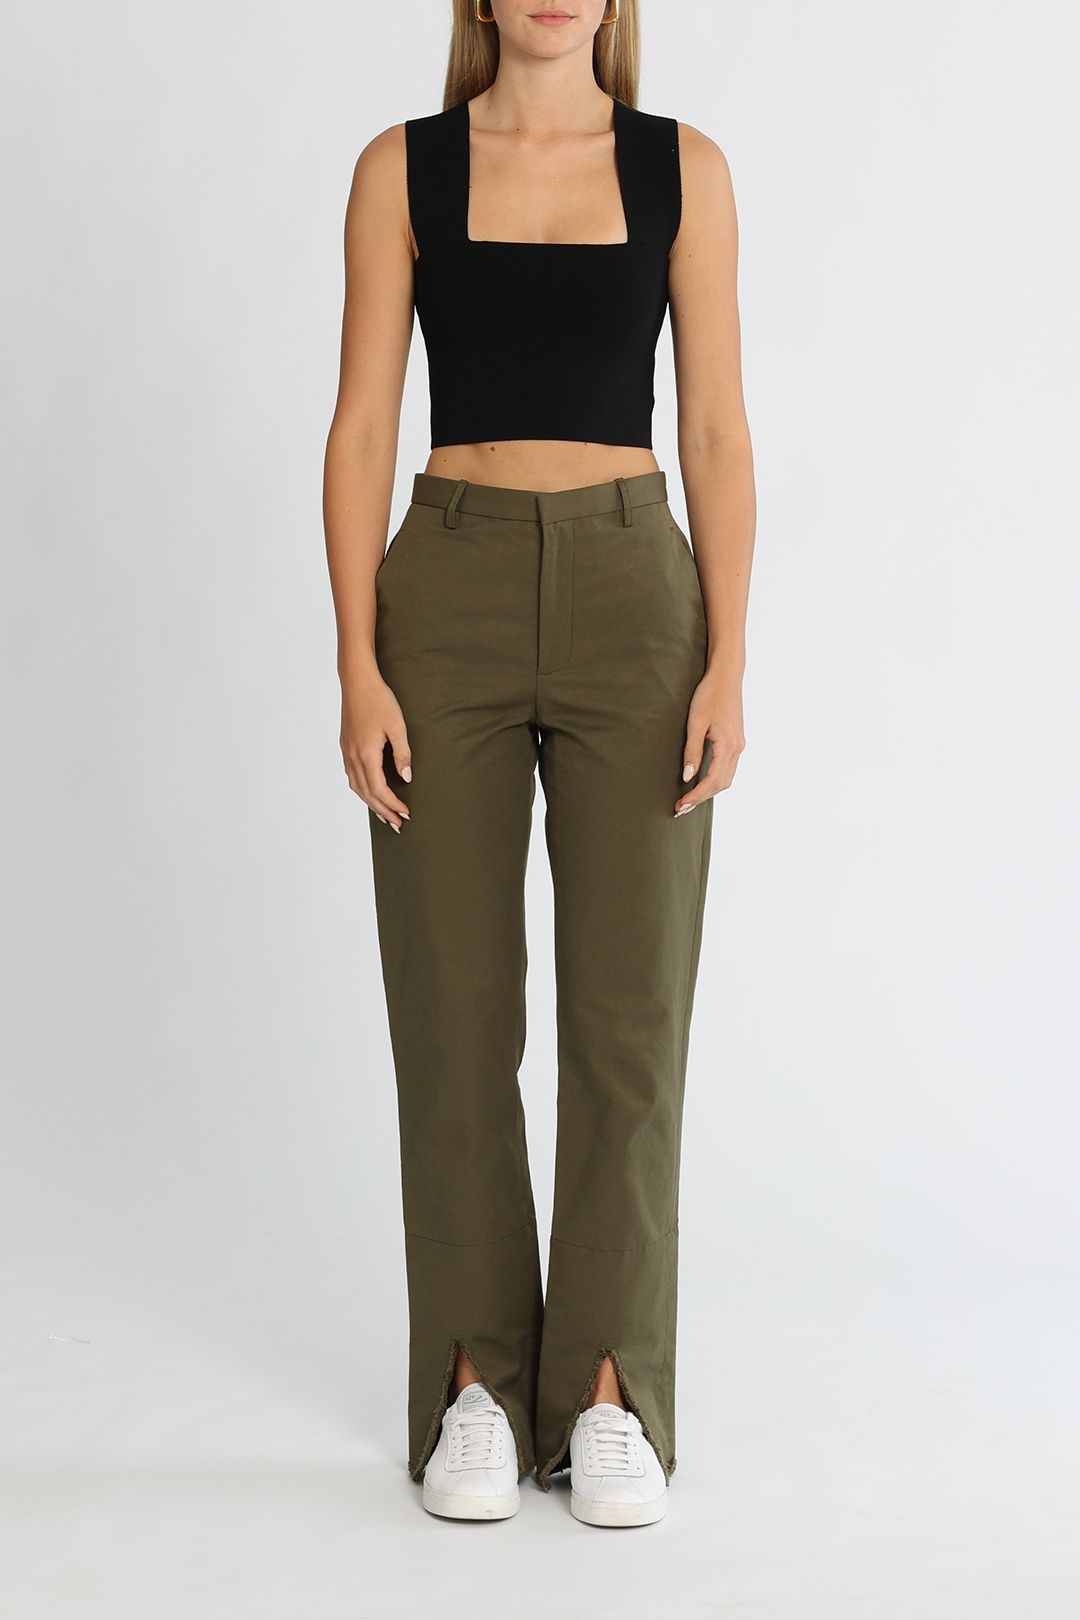 Helmut Lang Trousers with Frayed Seams. 6 — TopBoy